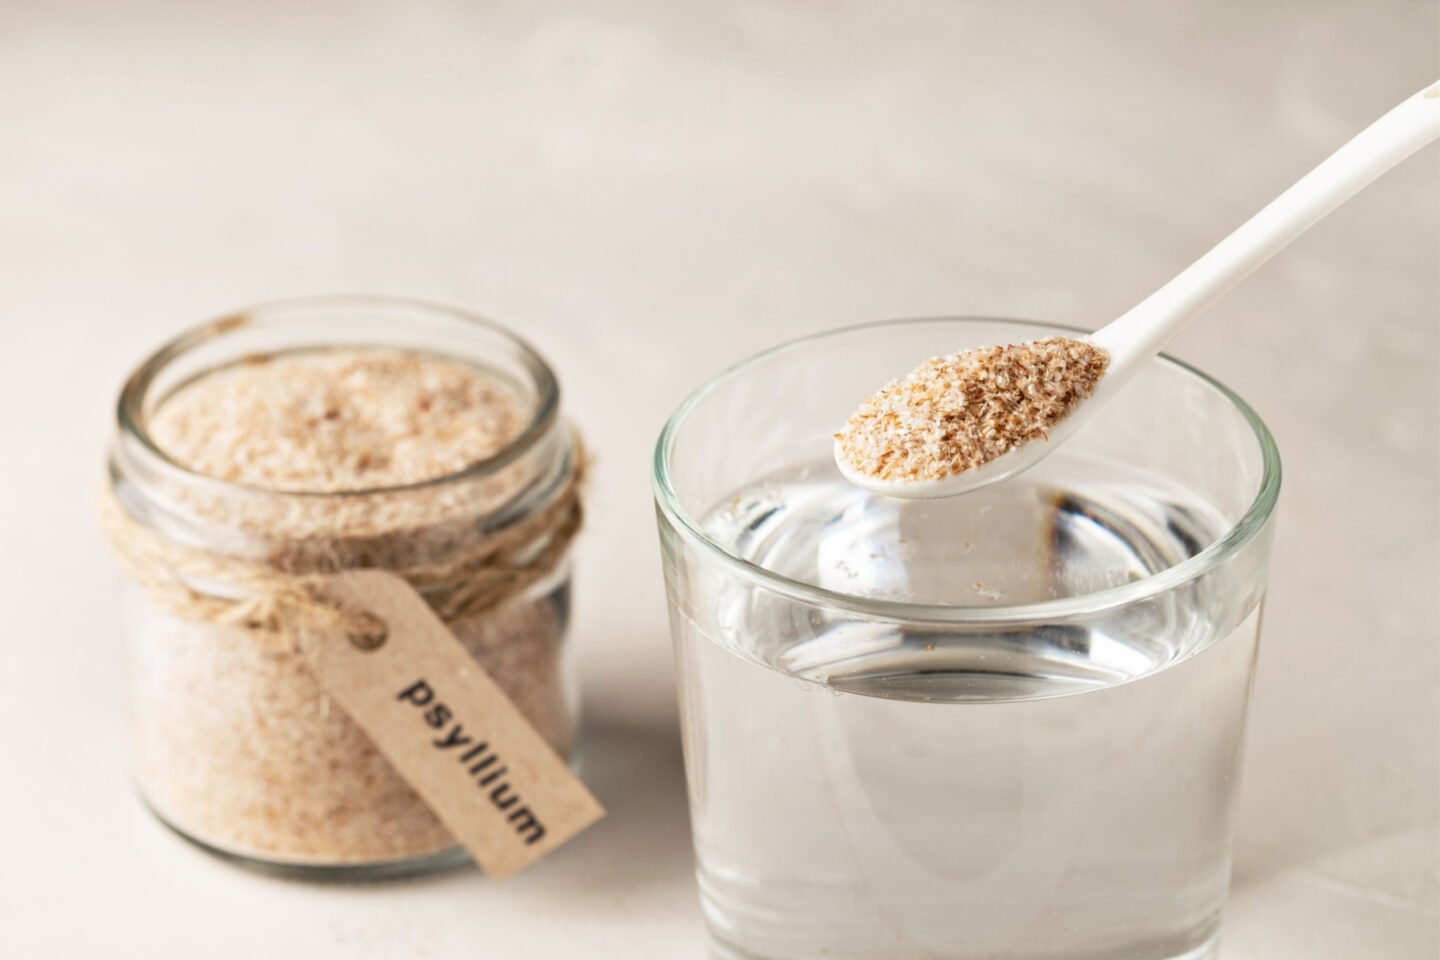 a jar and teaspoon of psyllium husk and a glass of water